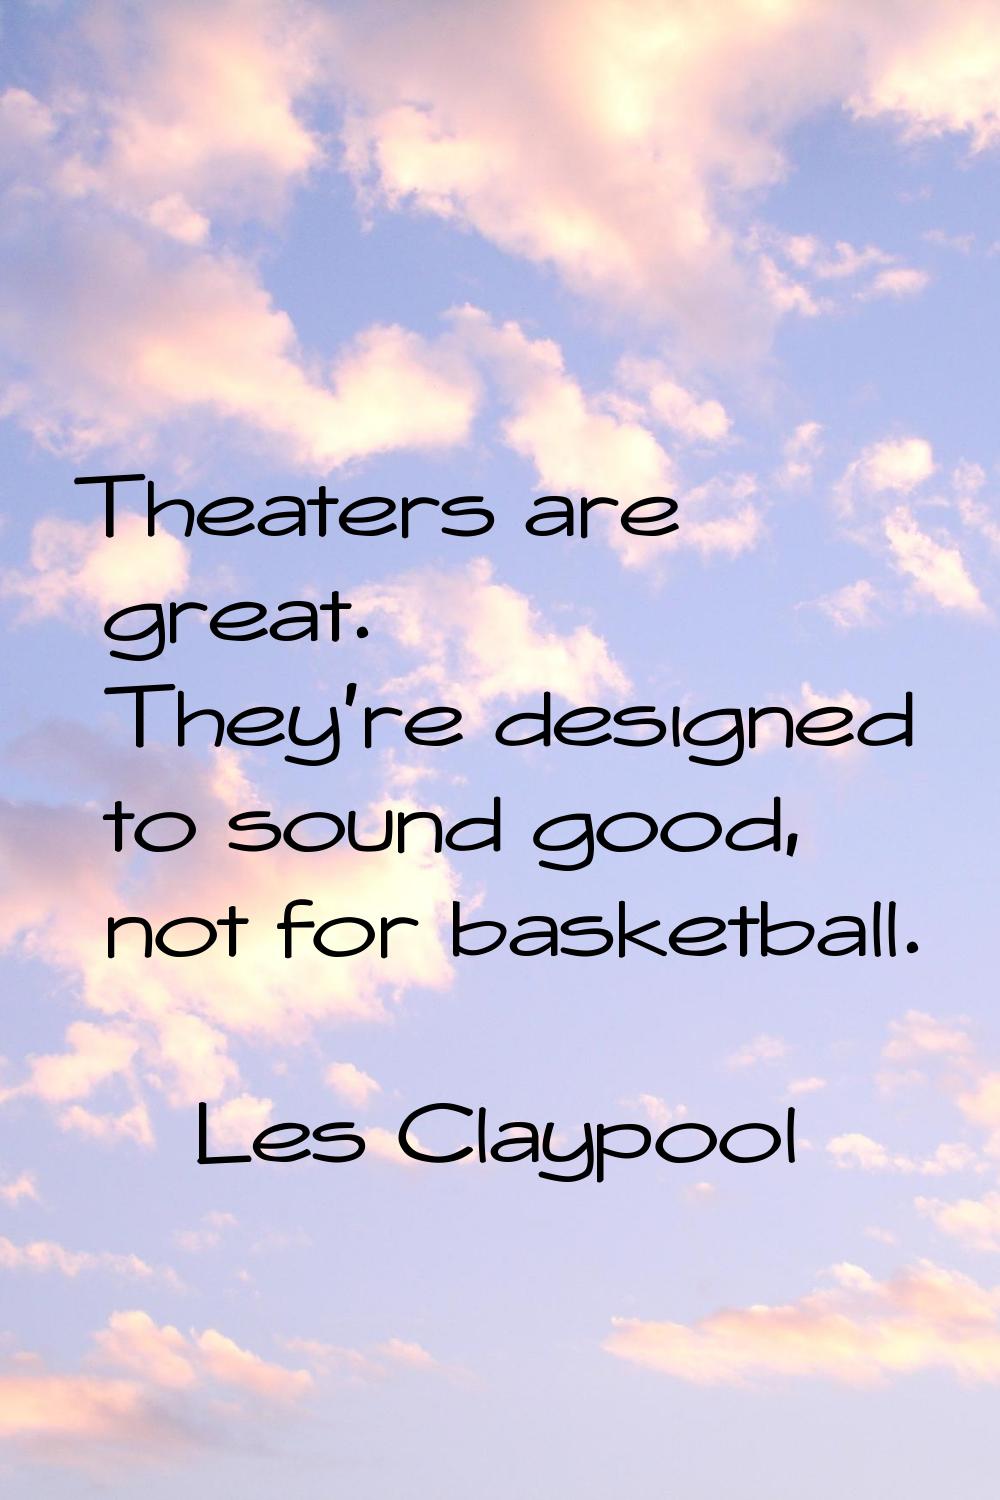 Theaters are great. They're designed to sound good, not for basketball.